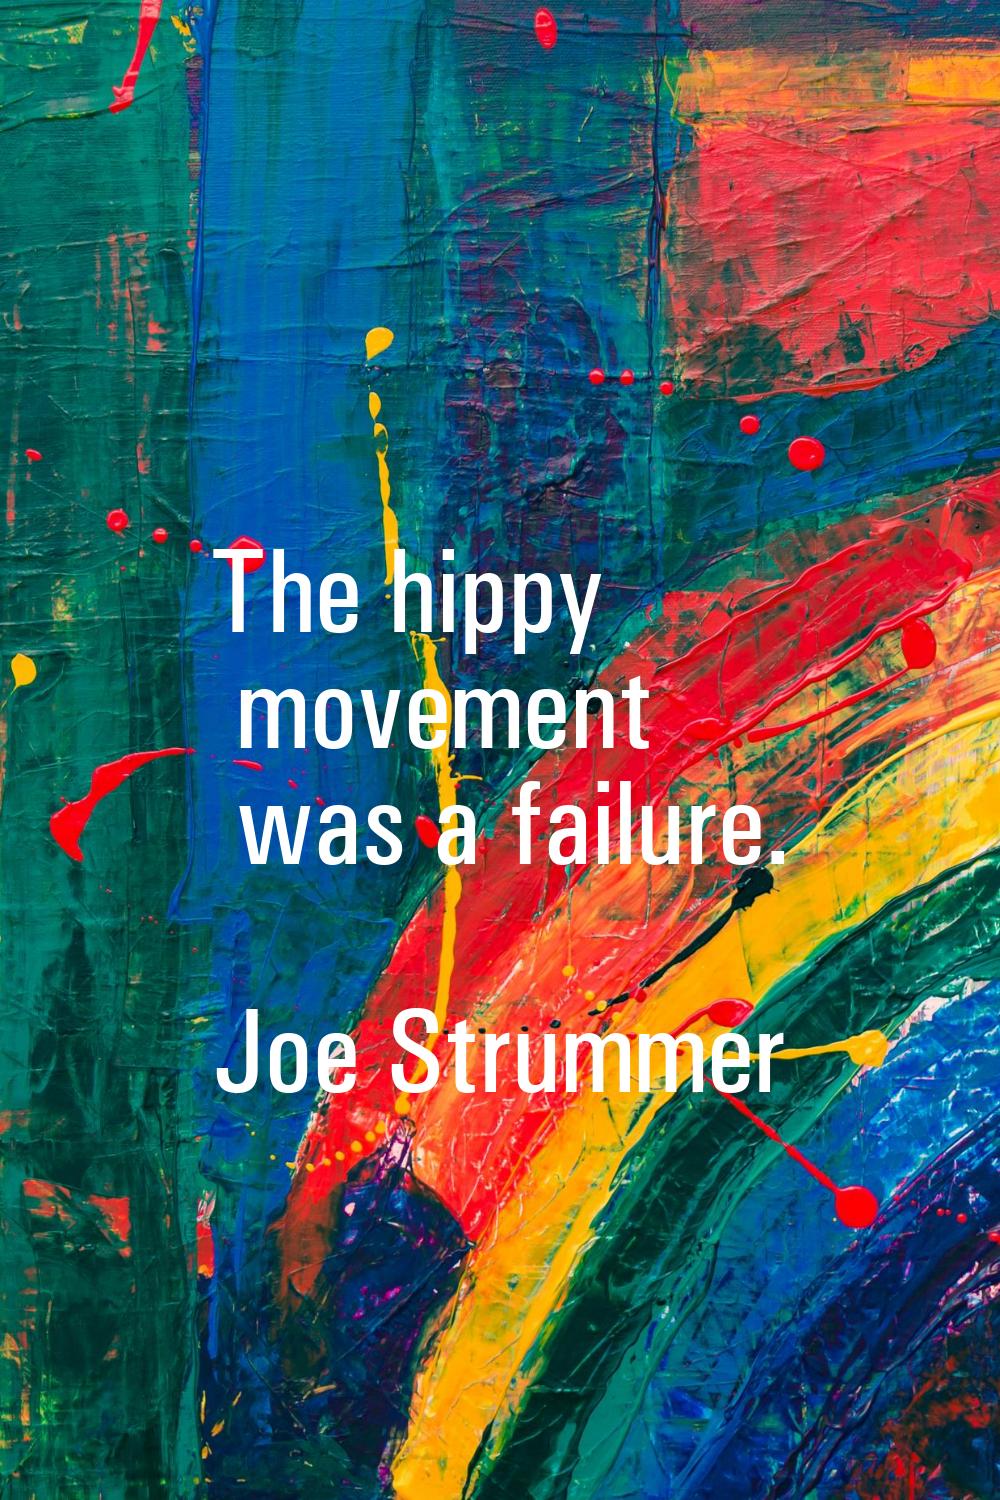 The hippy movement was a failure.